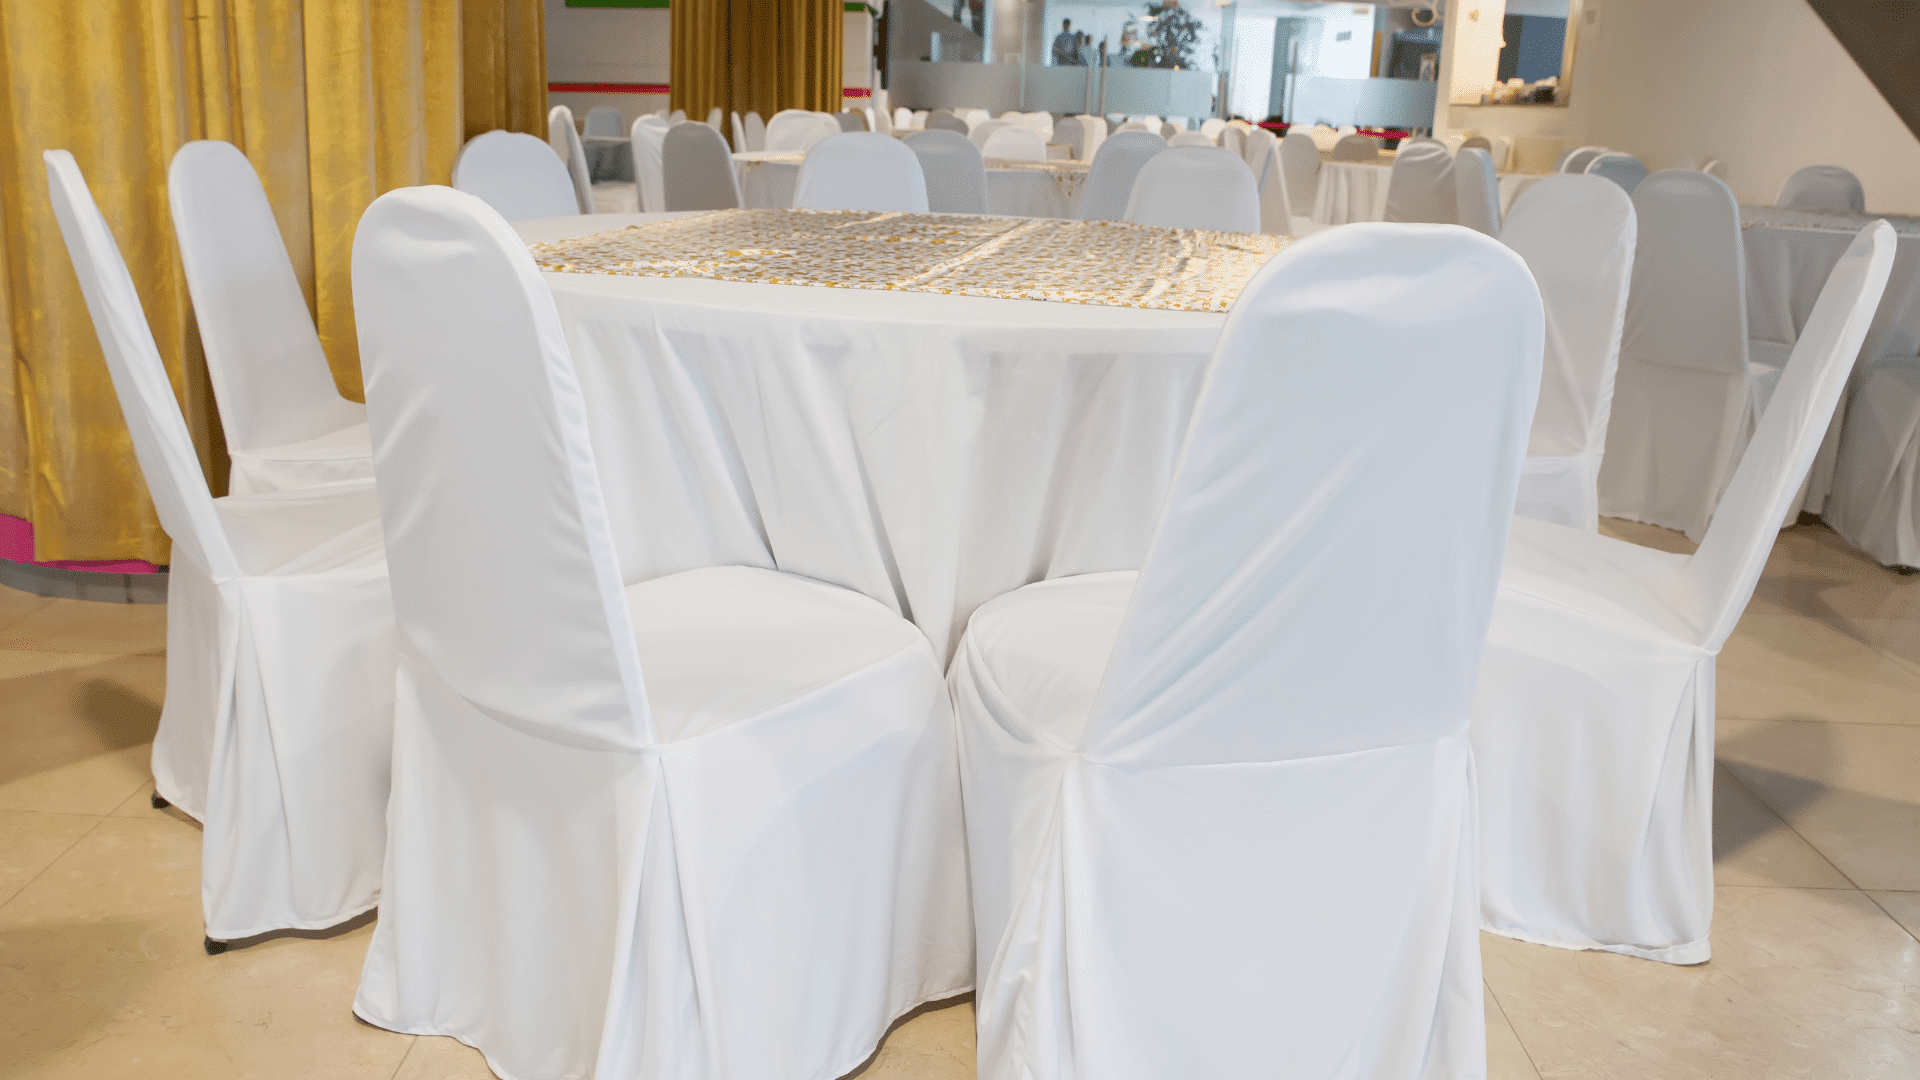 White event chairs for hire, chair hire header image